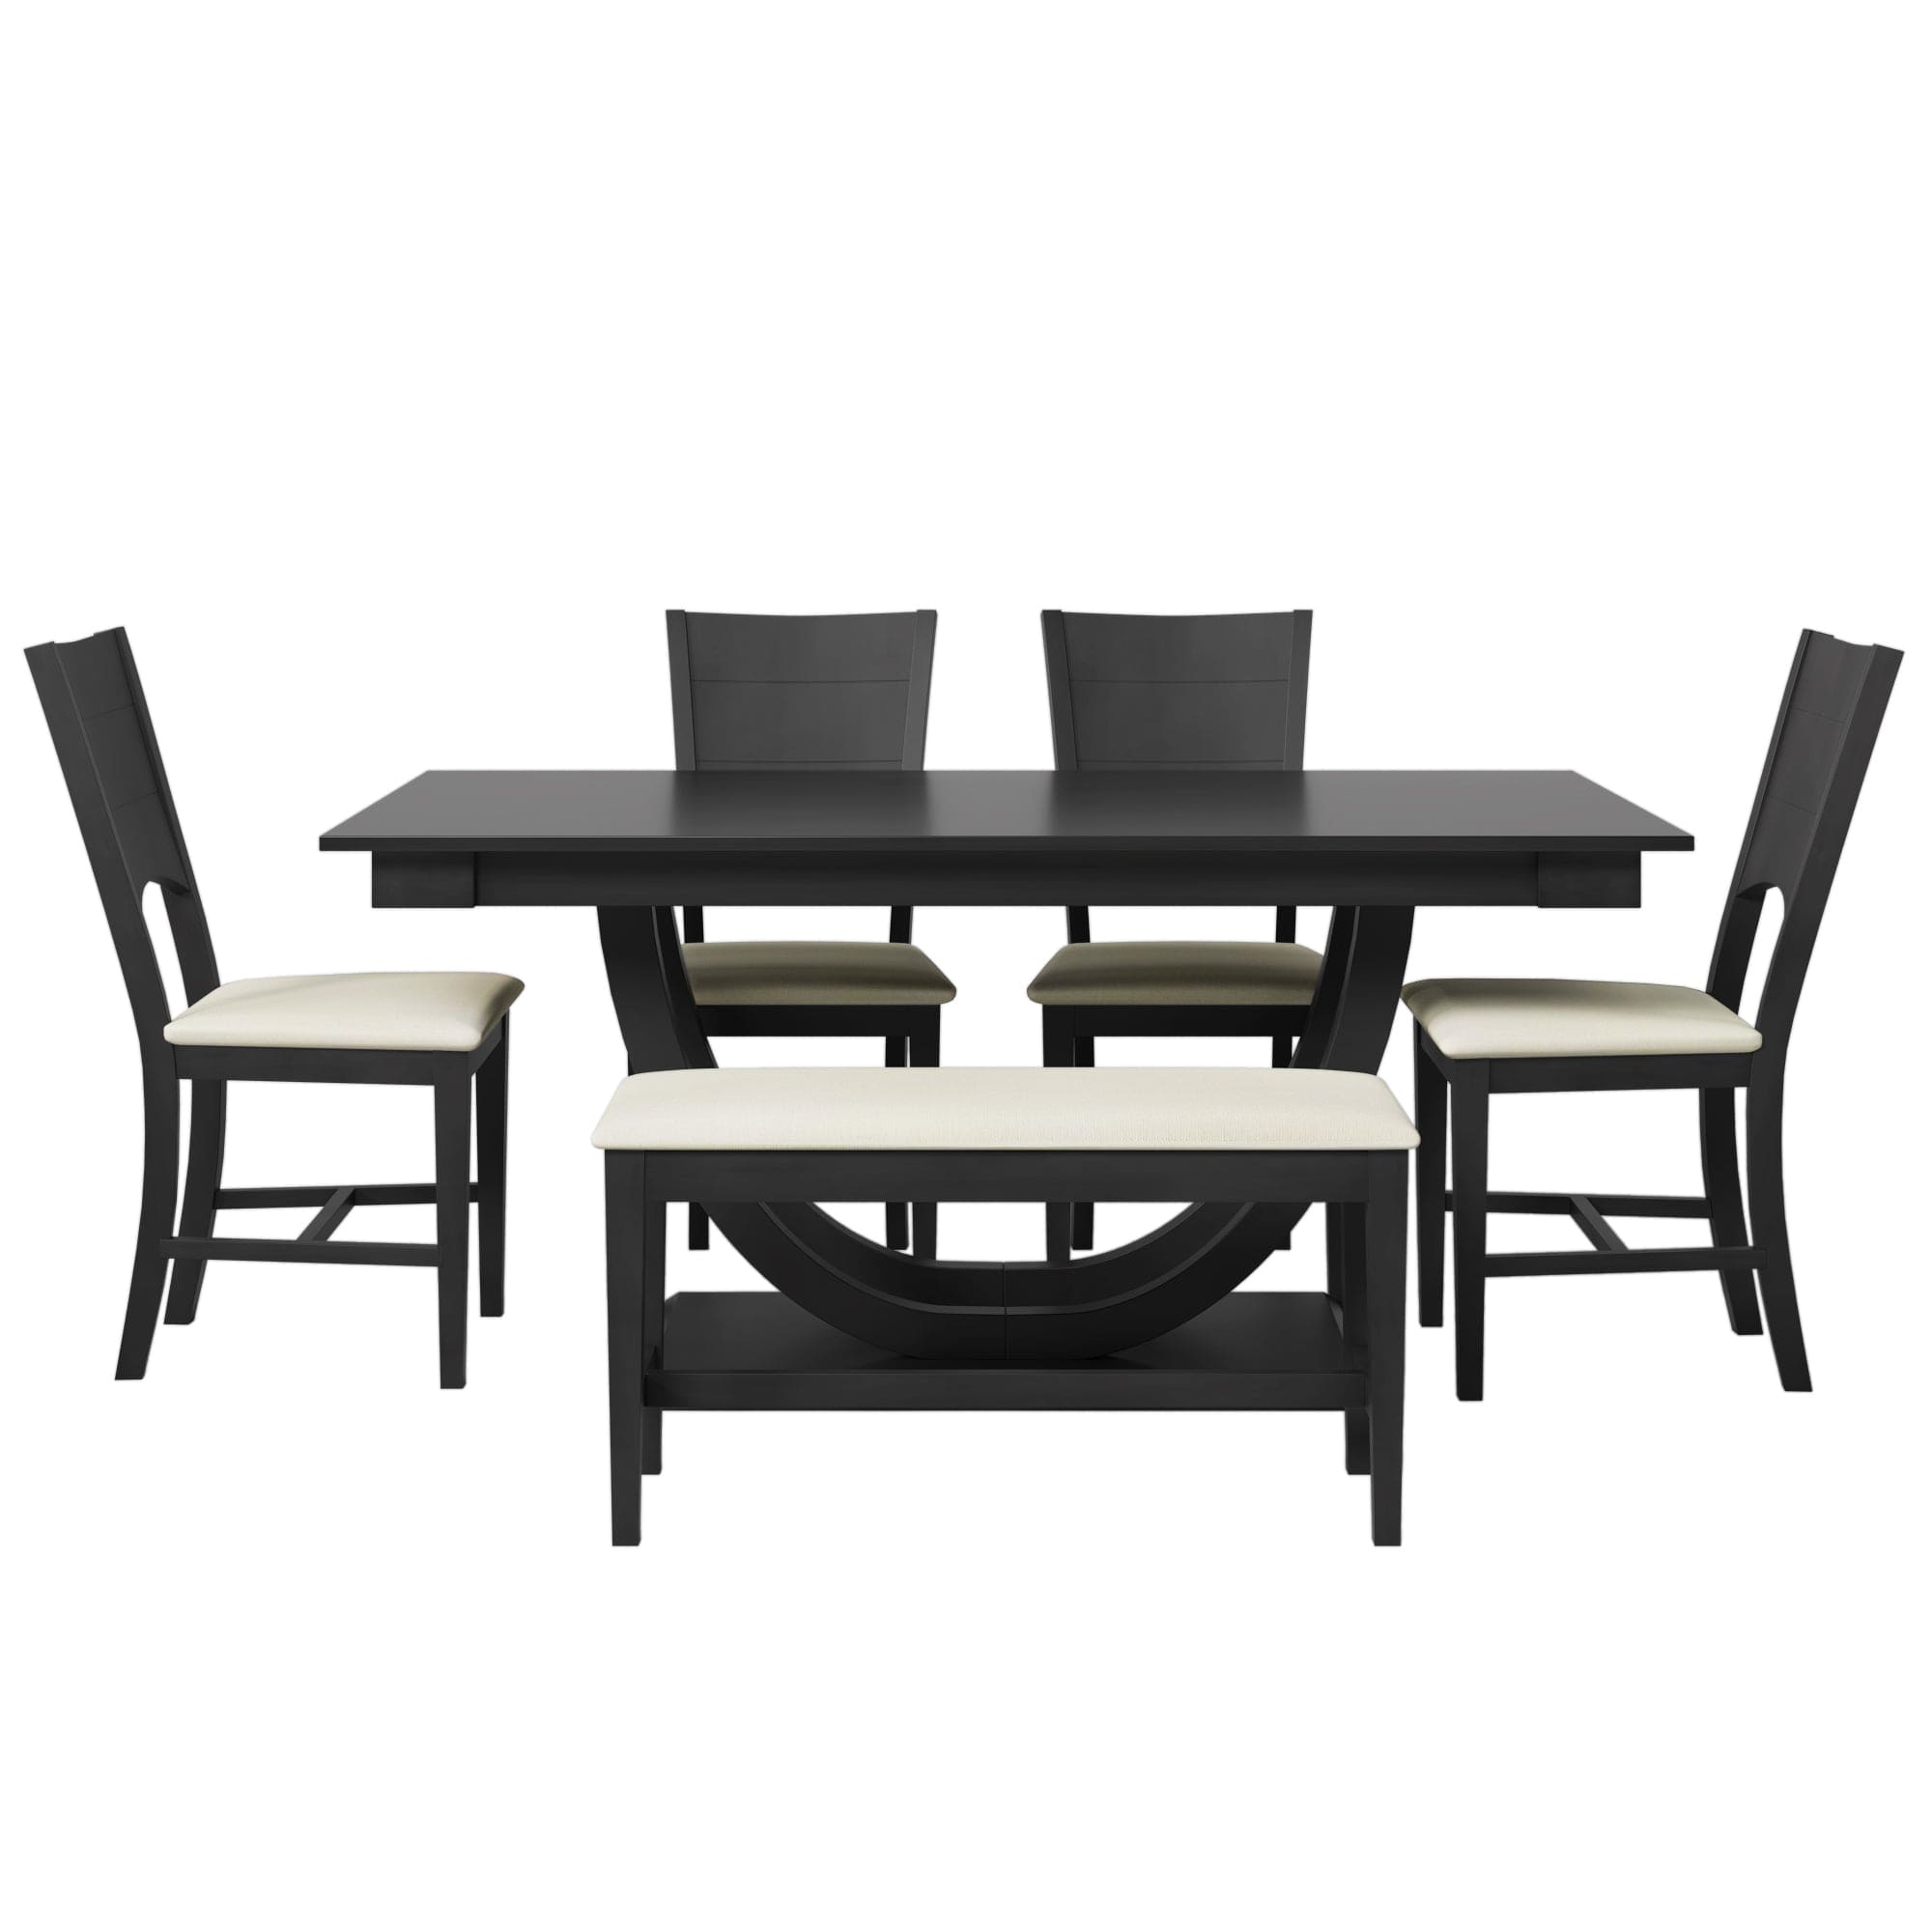 TOPMAX 6-Piece Wood Half Round Dining Table Set Kitchen Table Set with Long Bench and 4 Dining Chairs, Modern Style, Gray